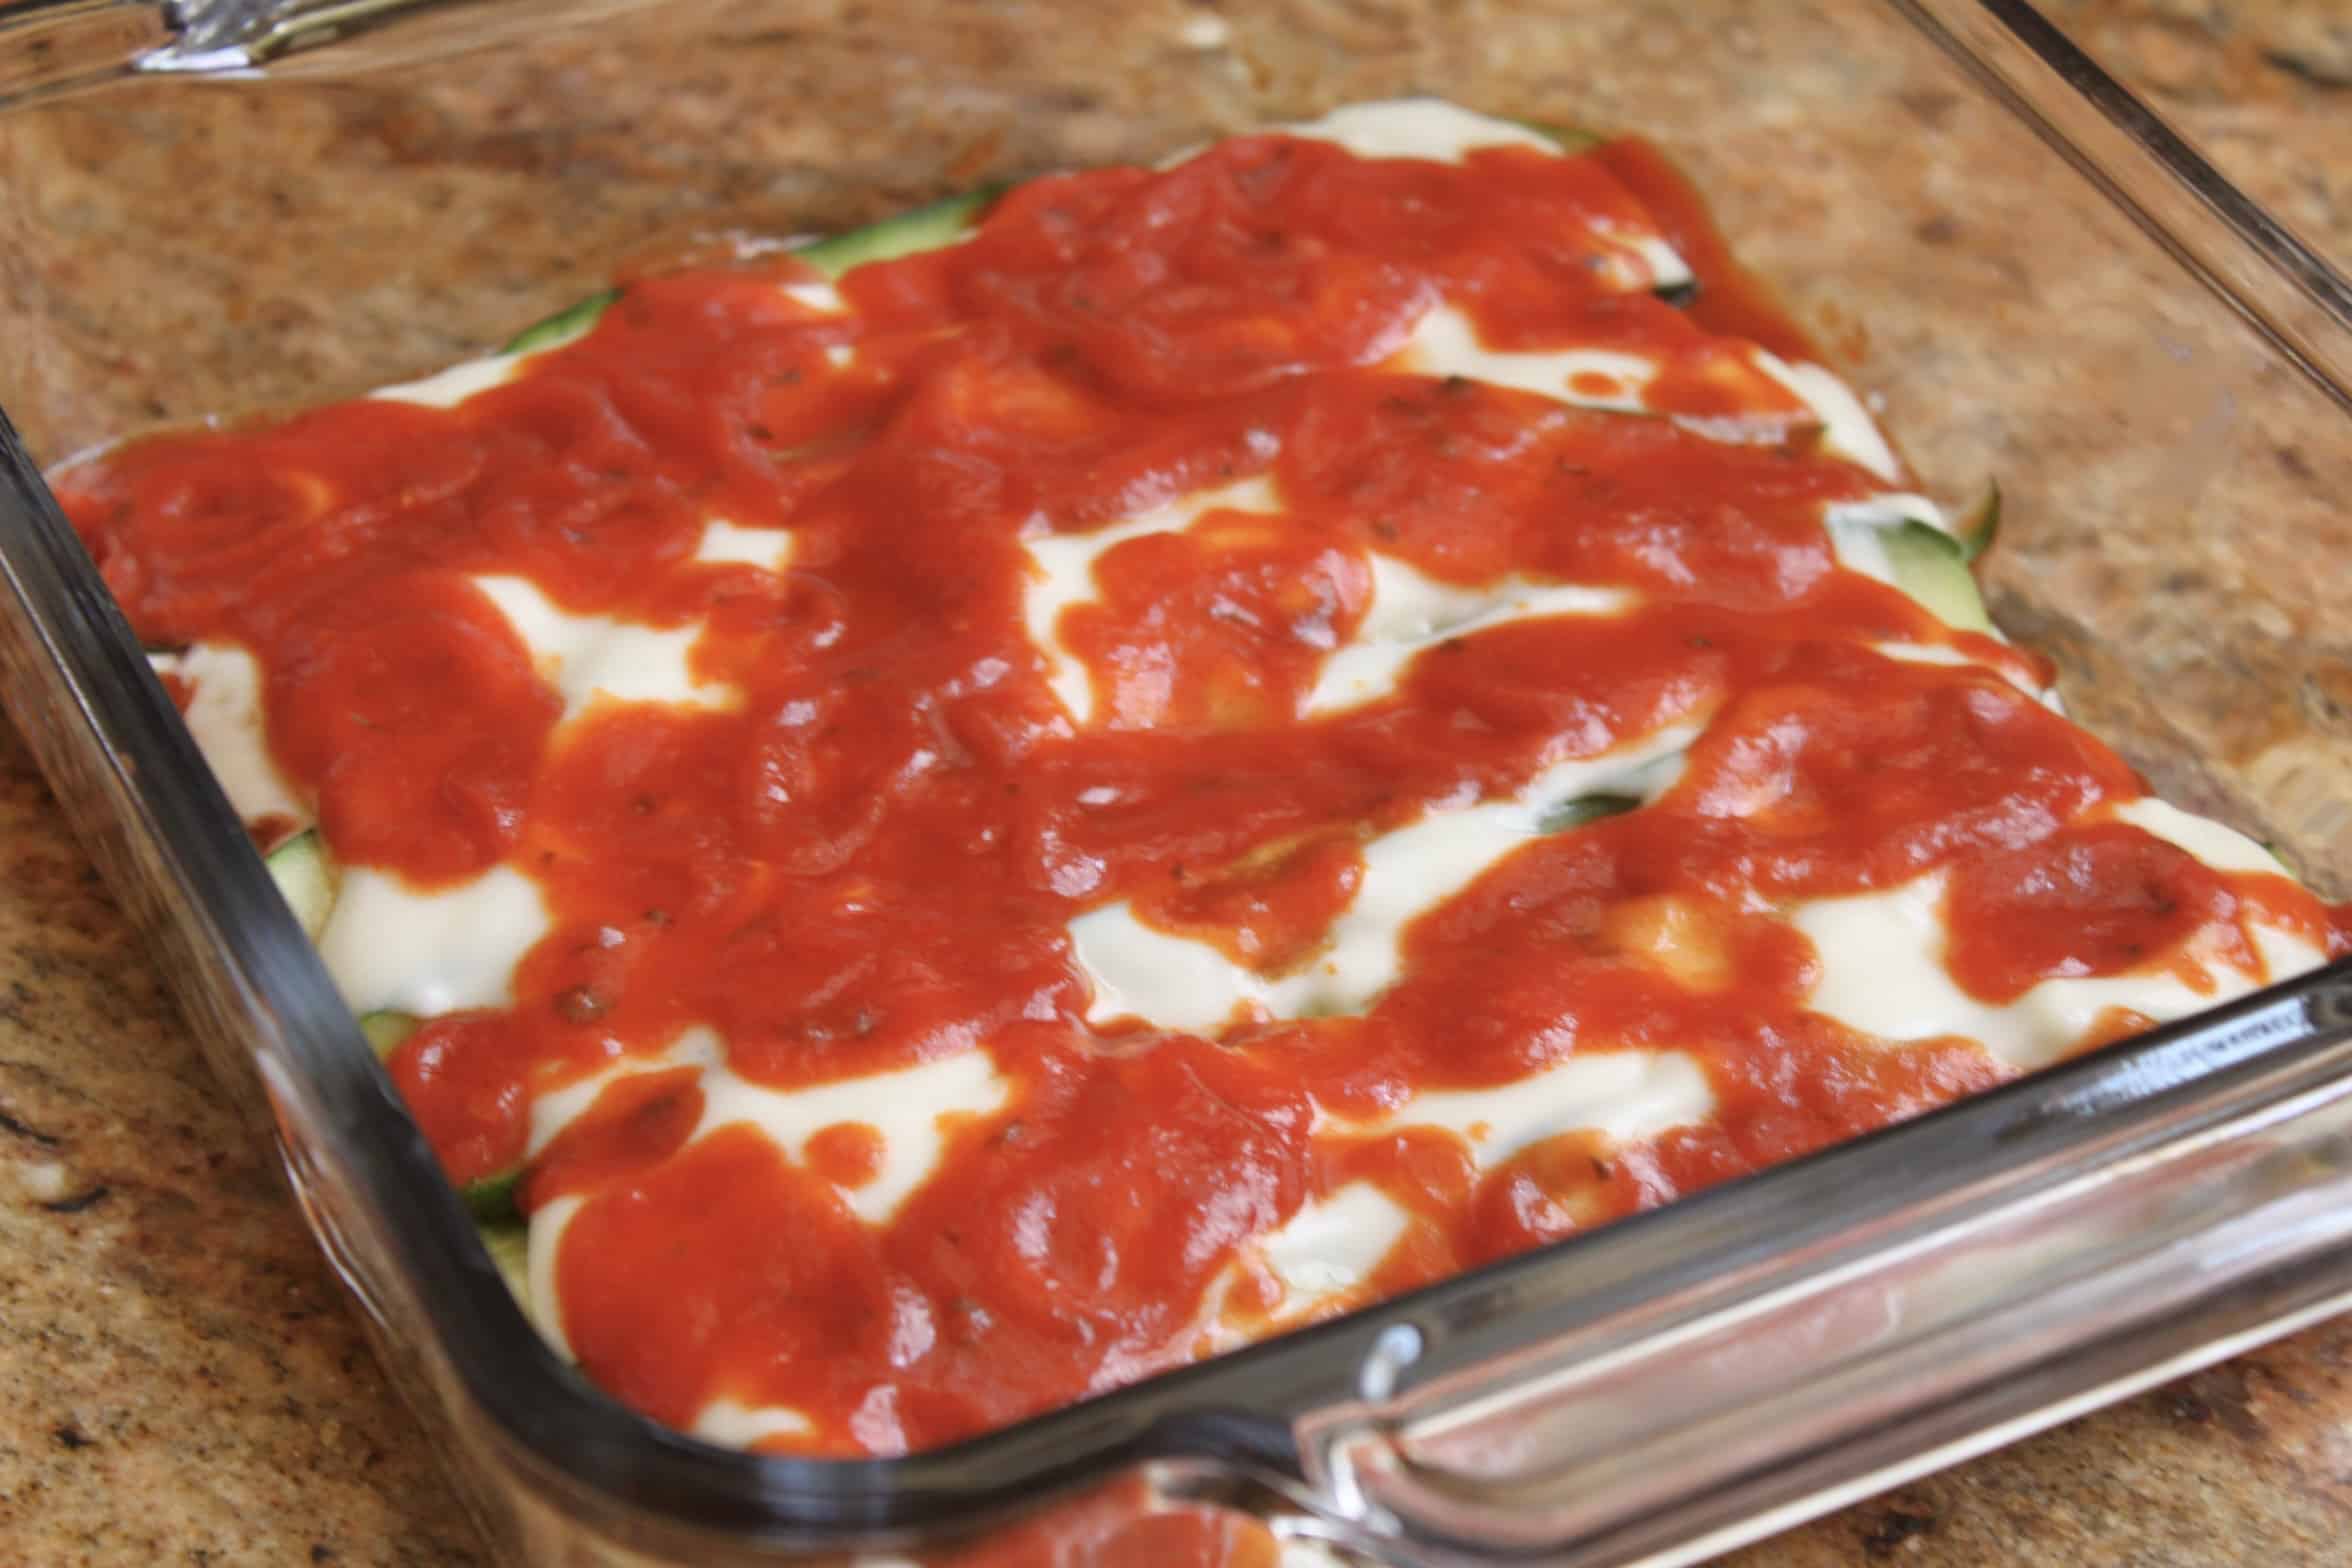 tomato sauce and white sauce layering on